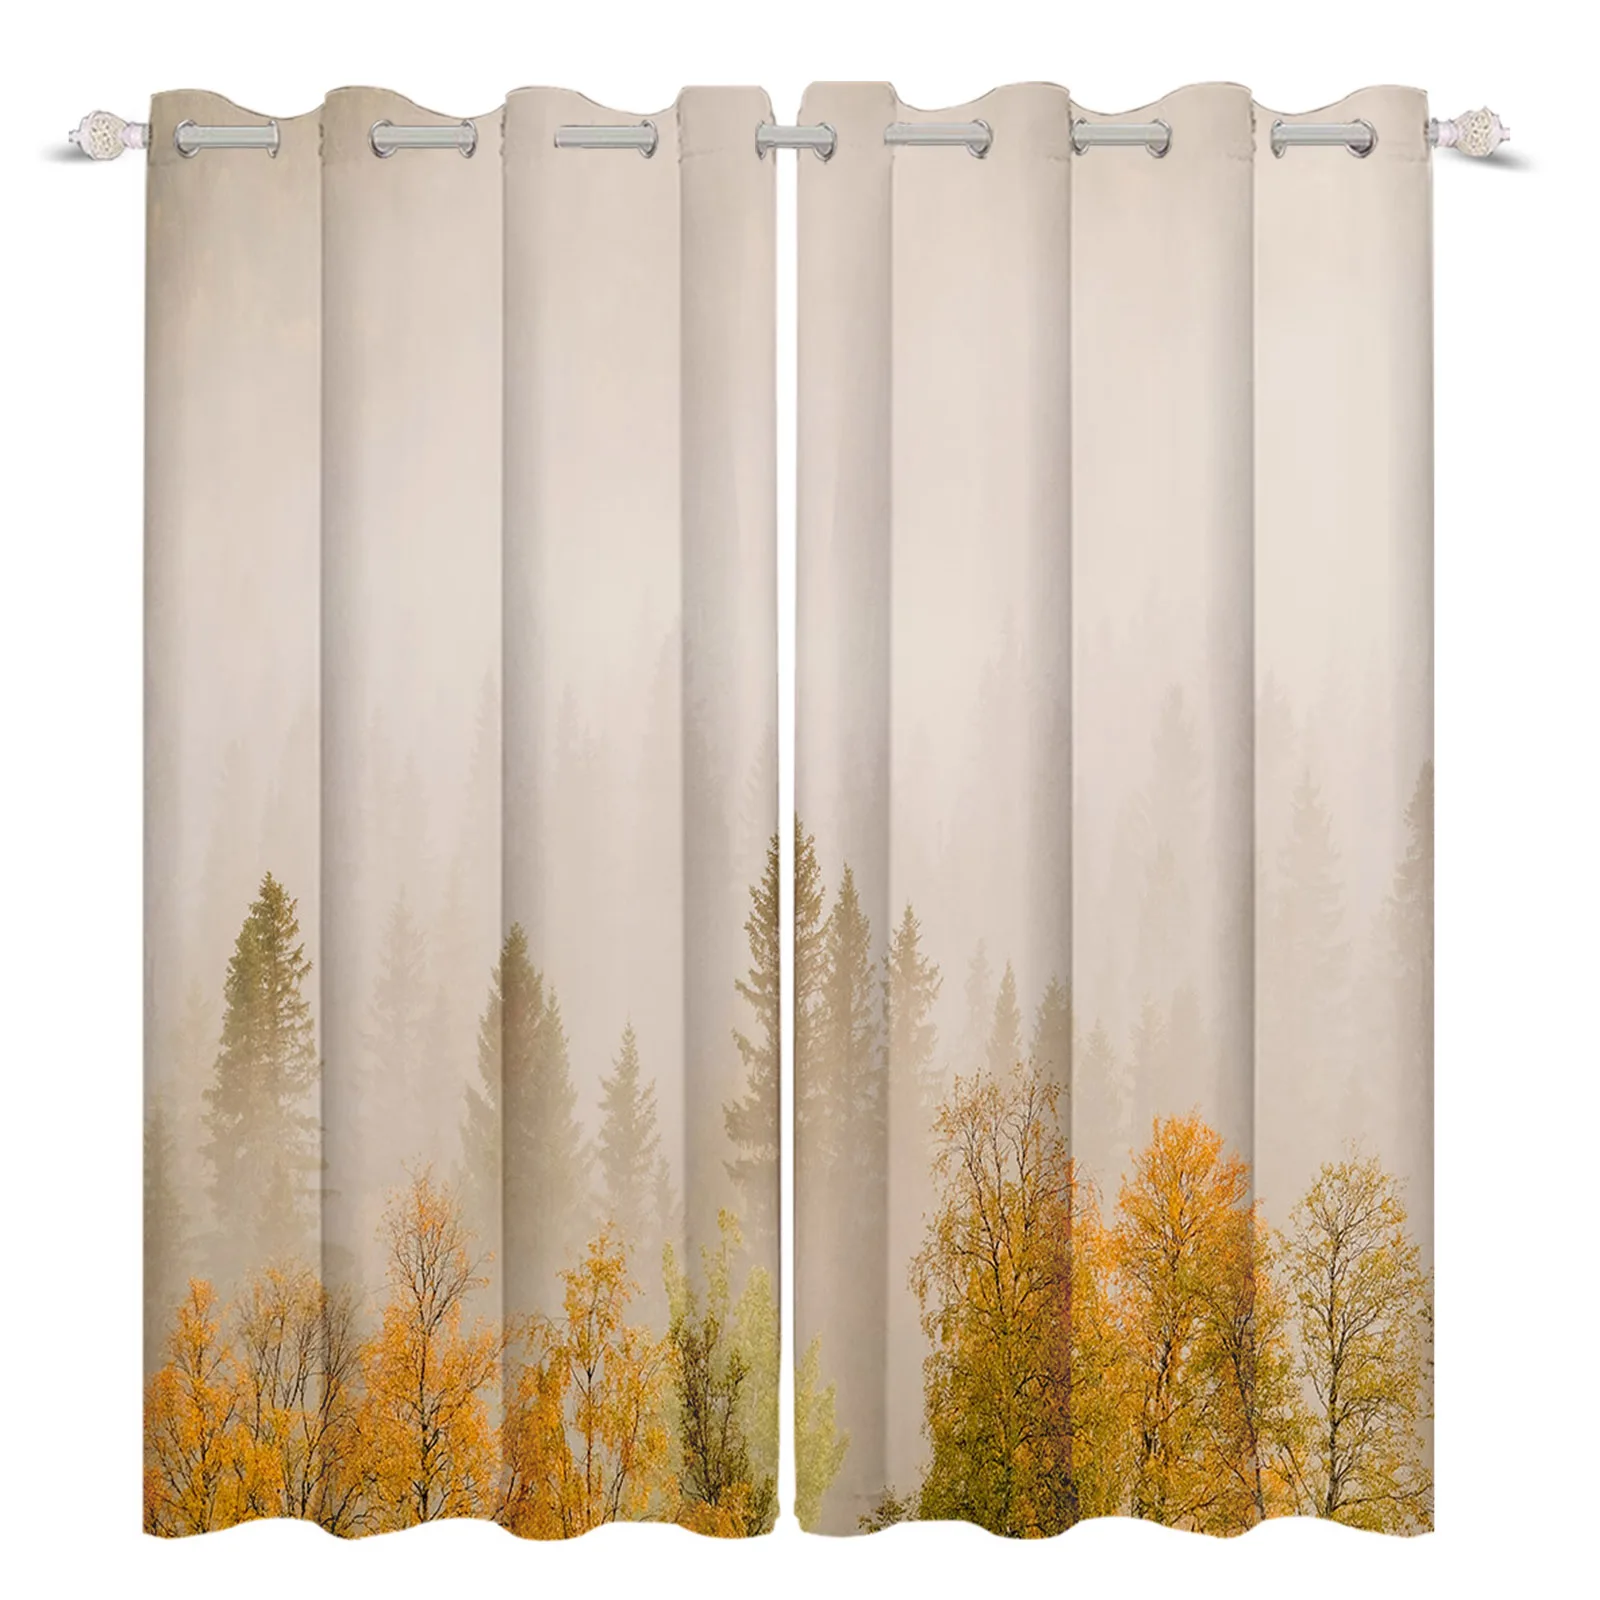 

Modern Living Room Bedroom Curtains Autumn Yellow Forest with Clouds Treatment Drapes Home Decoration With Grommet Accessories